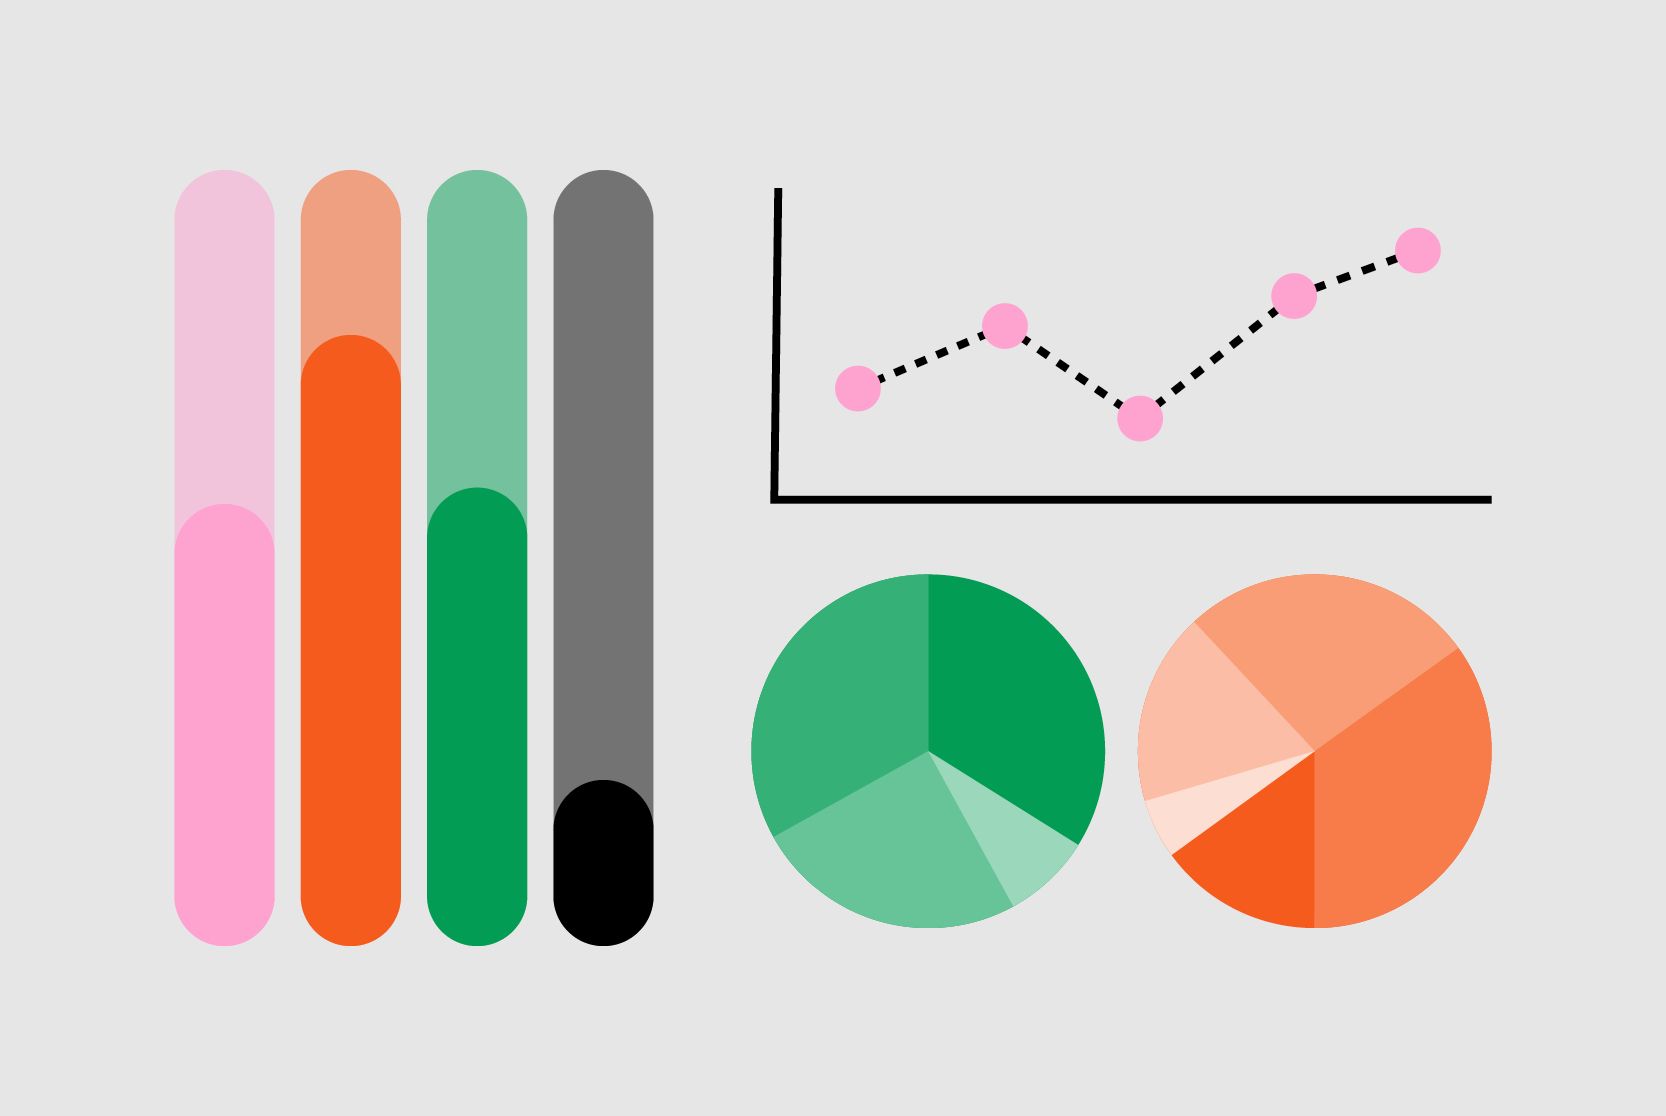 an image to show analytics in the form of bars, graphs and pie charts